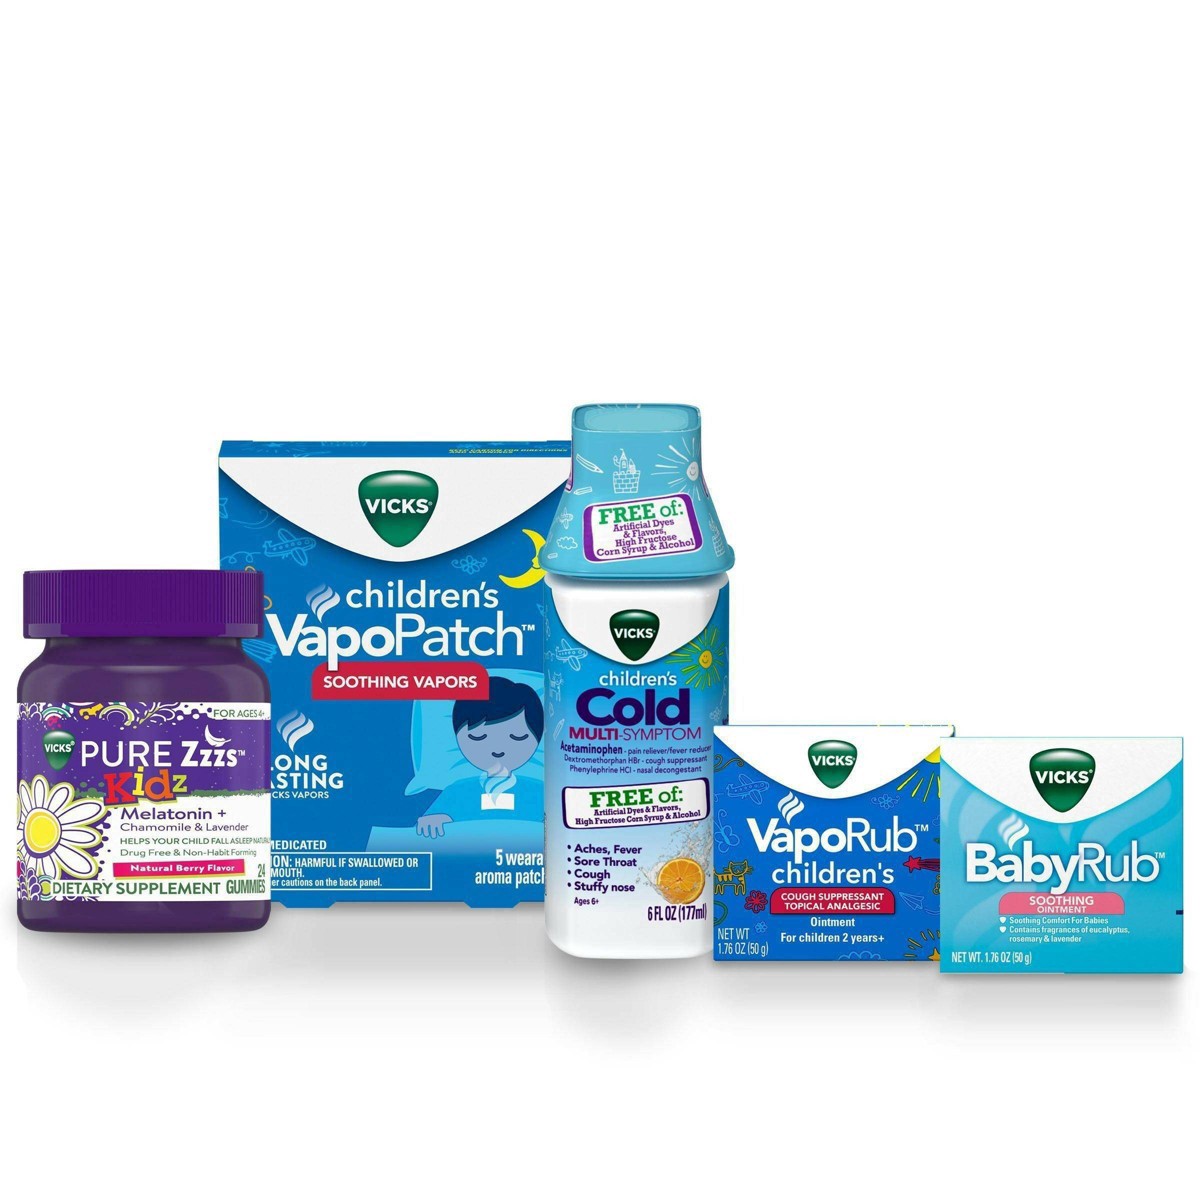 slide 3 of 37, Vicks Children's VapoPatch with Long Lasting Soothing Vapors - Menthol - 5ct, 5 ct